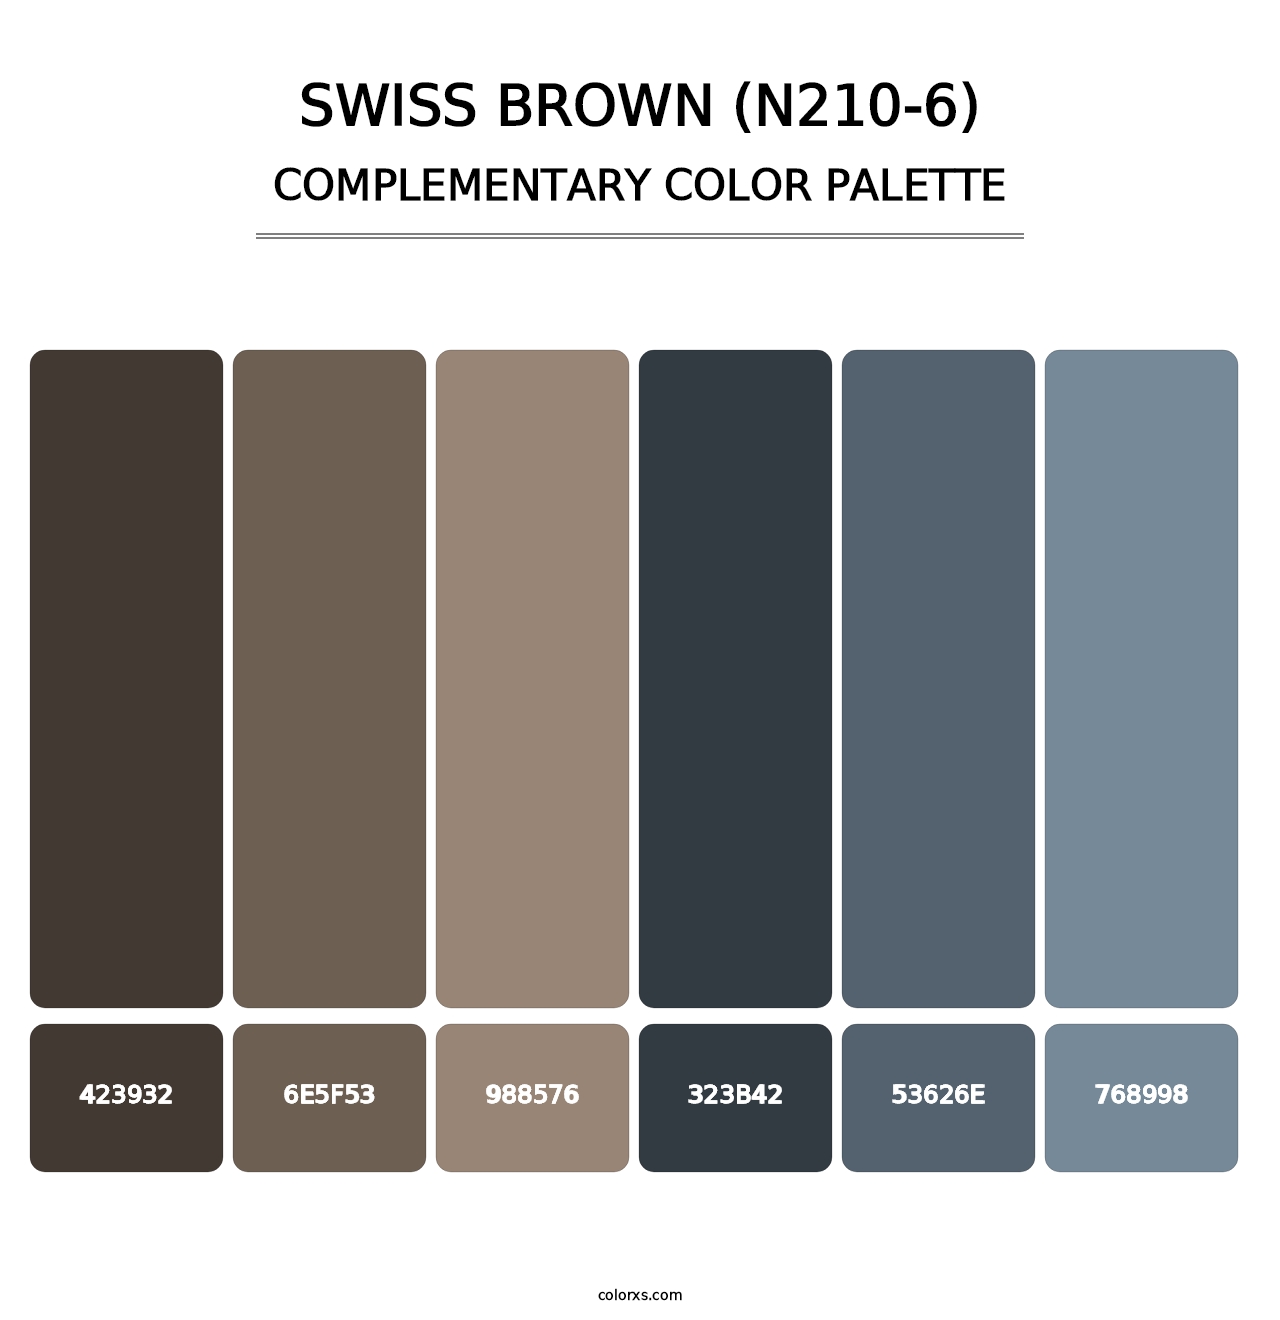 Swiss Brown (N210-6) - Complementary Color Palette